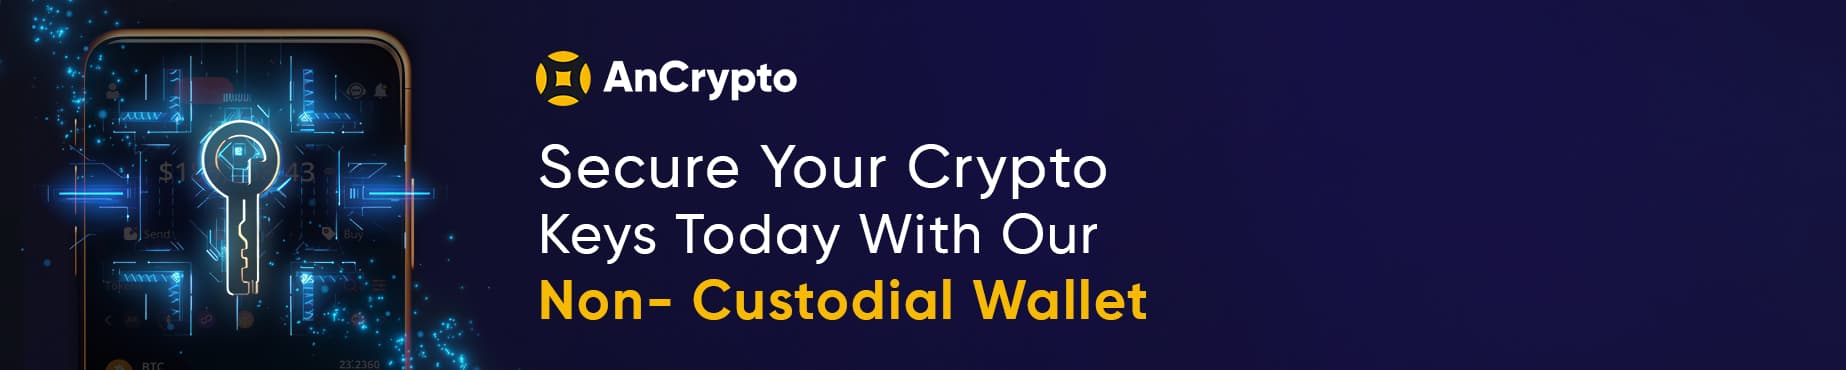 Secure Your Crypto Keys Today With Our Non-Custodial Wallet